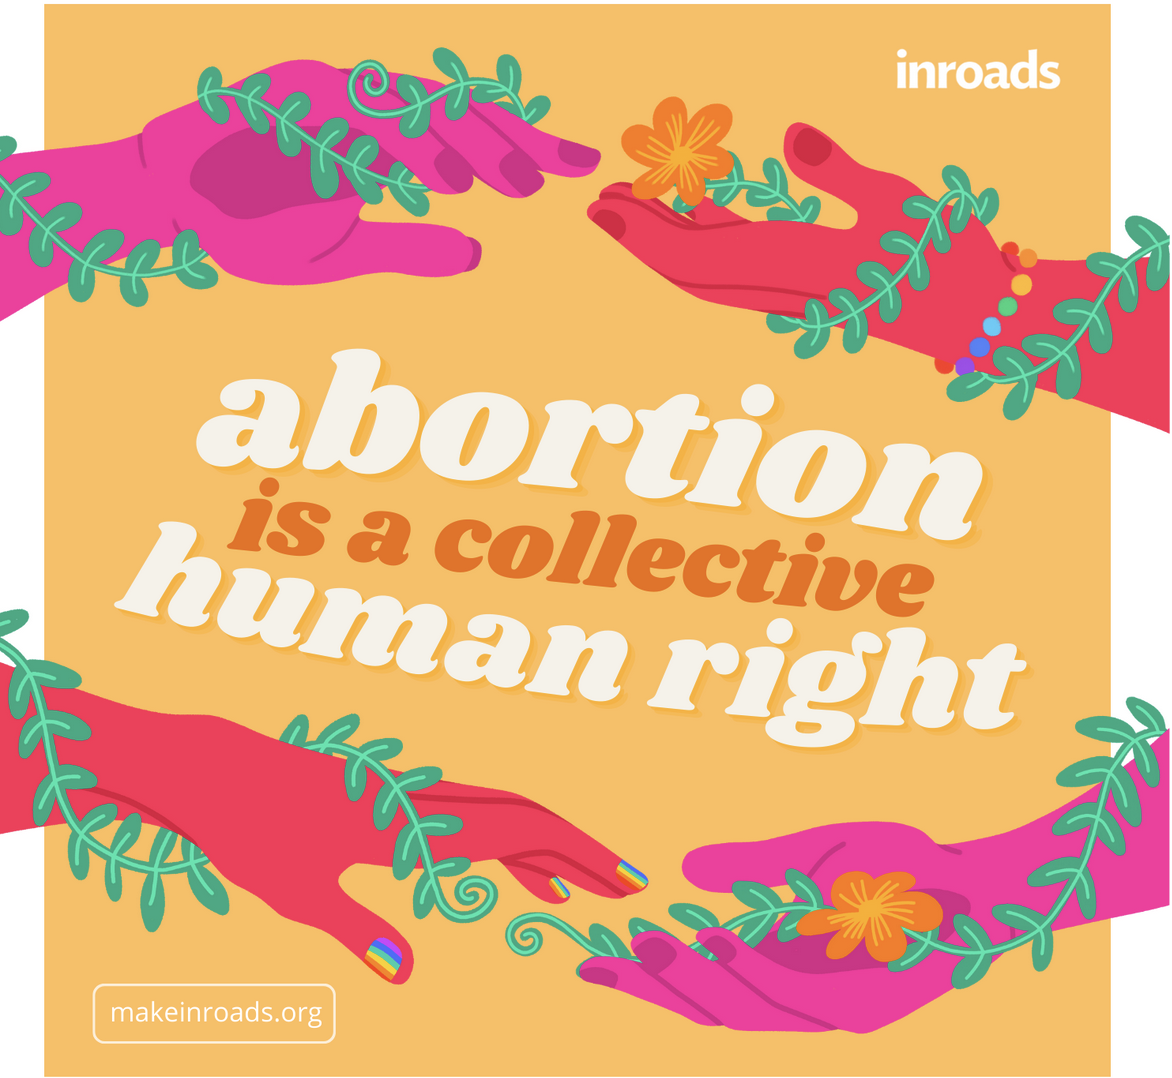 Yellow background. Colorful hands covered in flowers join at the top and bottom, expressing solidarity and community. In the center, it says: Abortion is a collective human right. 